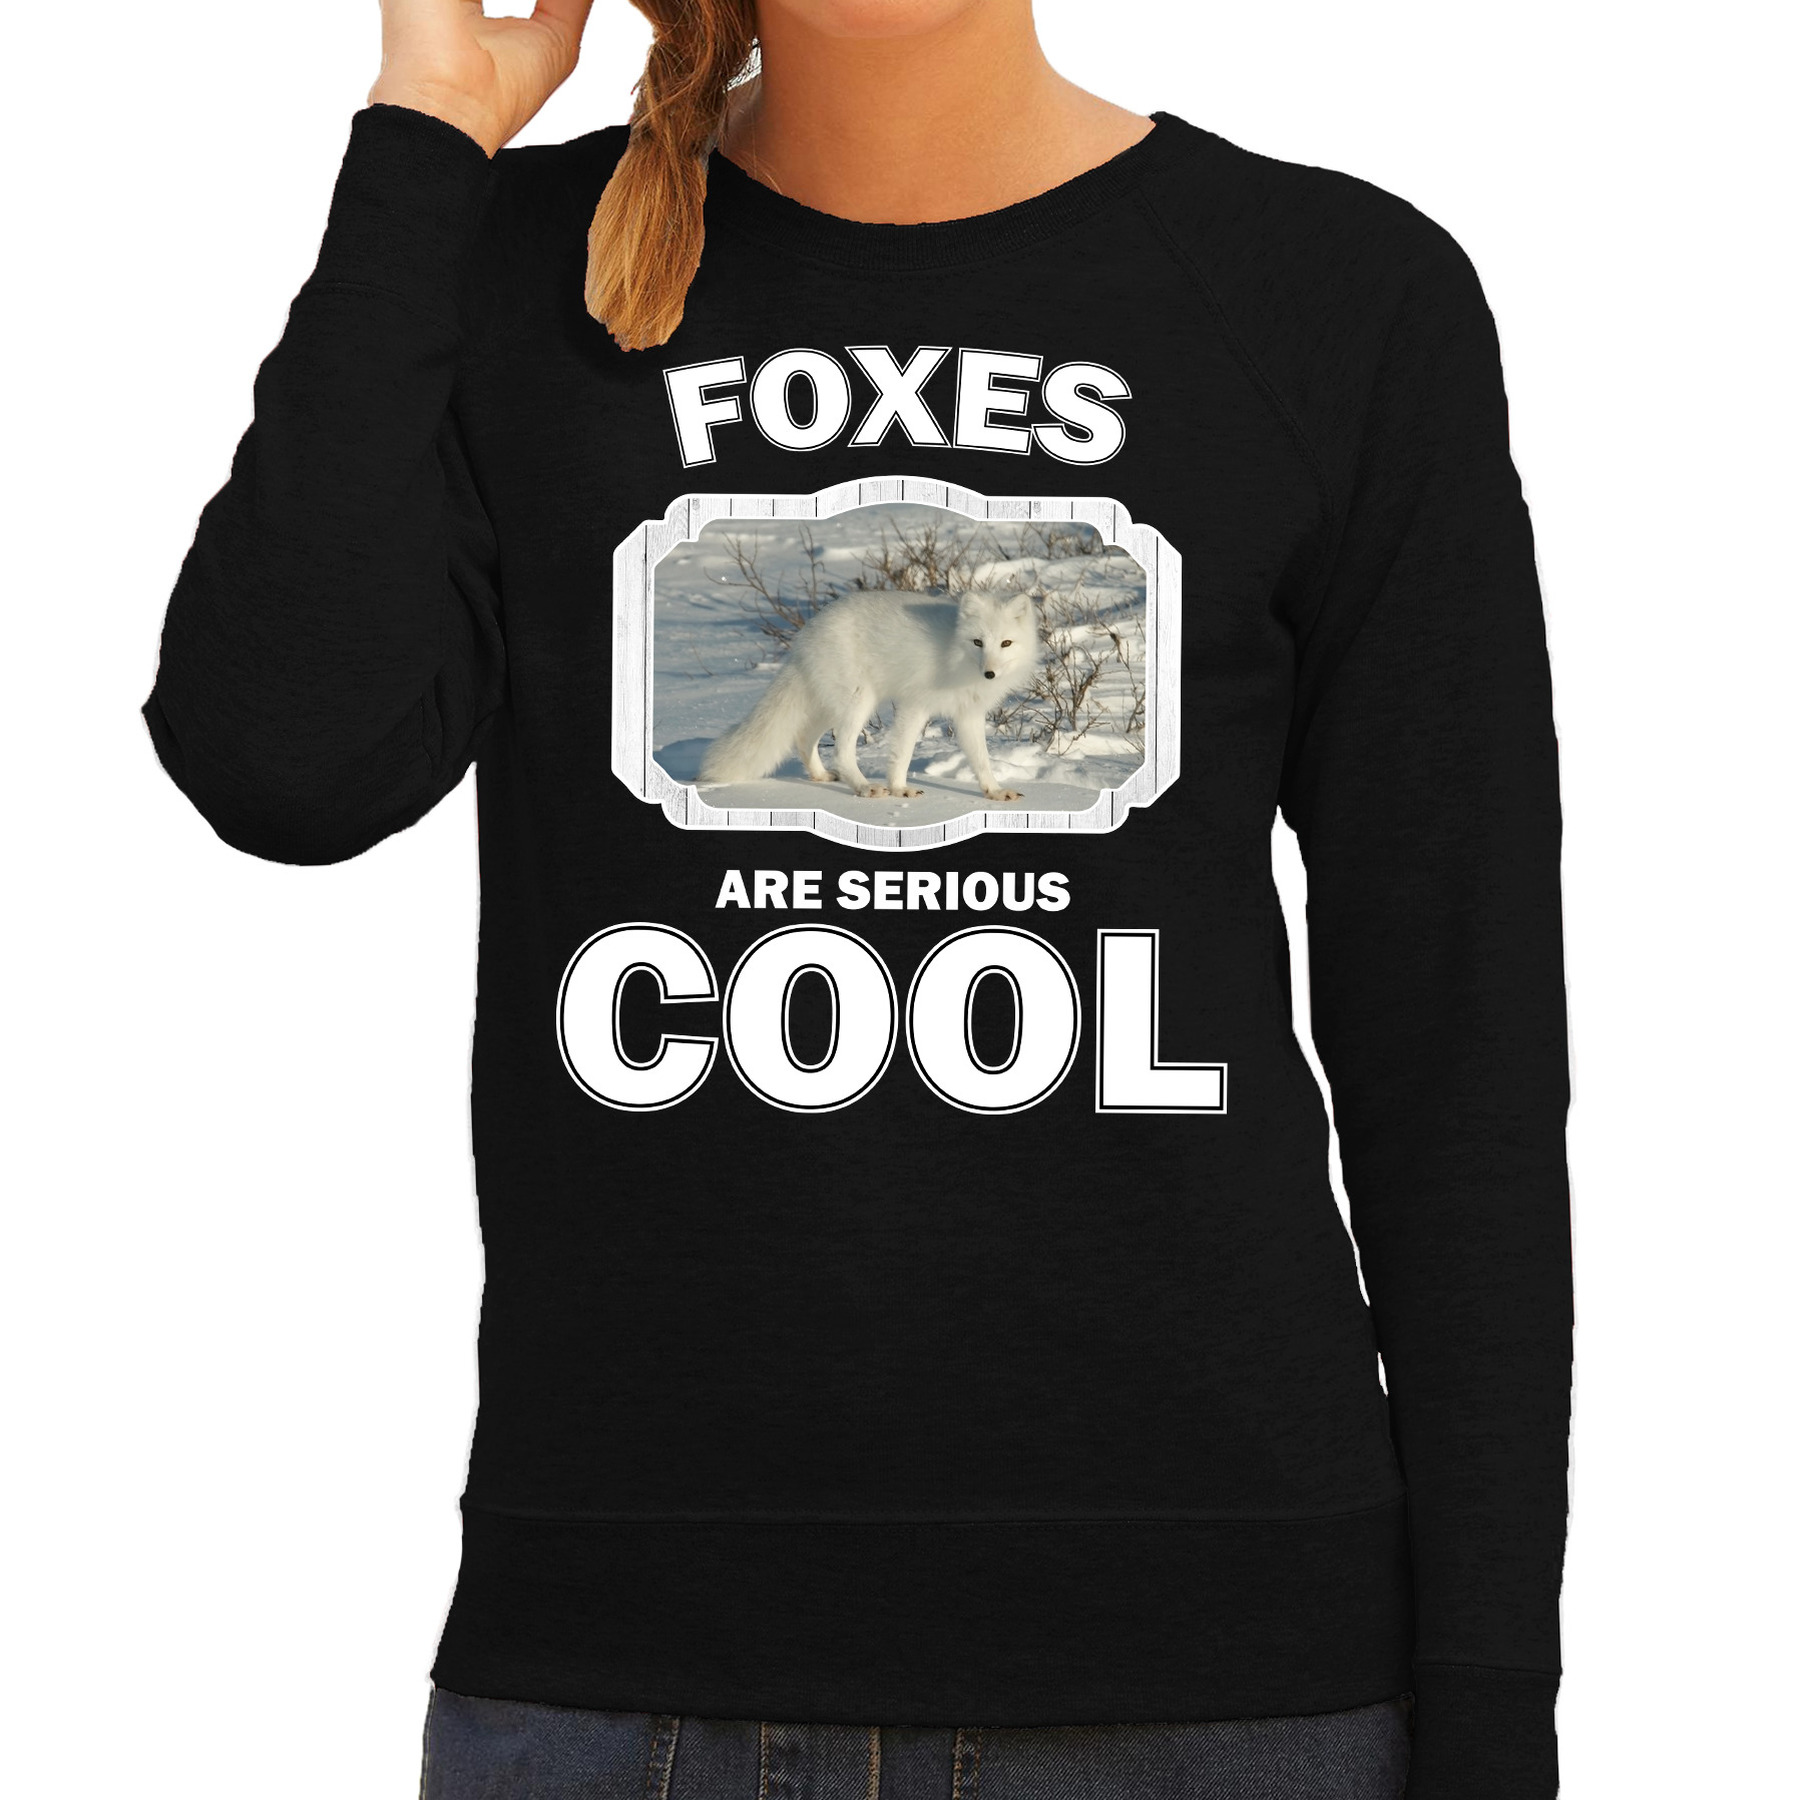 Dieren poolvos sweater zwart dames - foxes are cool trui